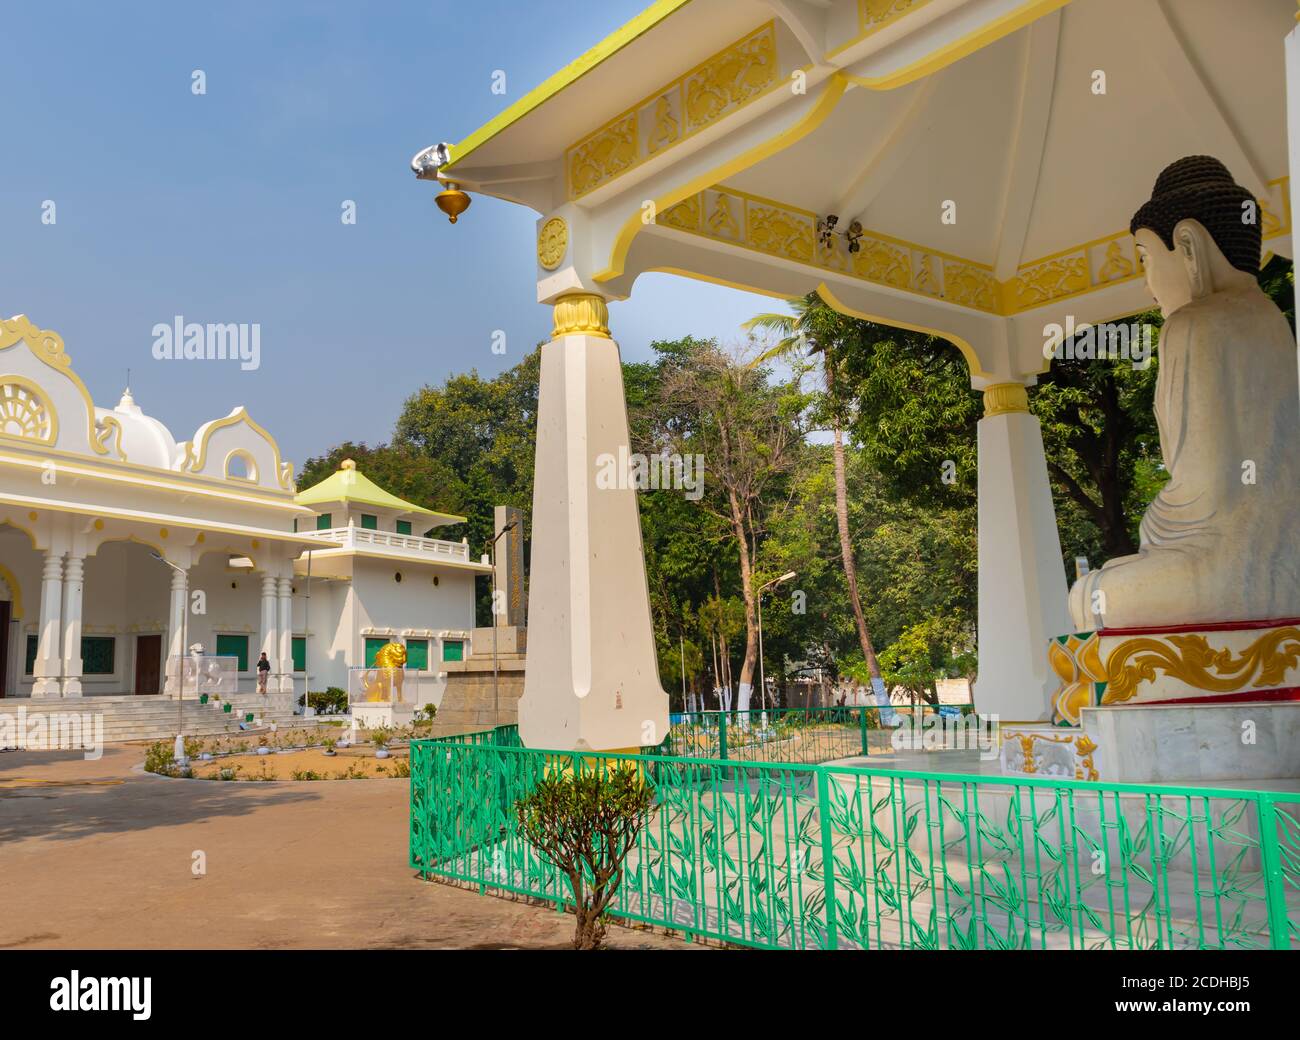 Japanese temple with bright blue sky image is taken at rajgir bihar india at morning on Feb 20 2020. Stock Photo